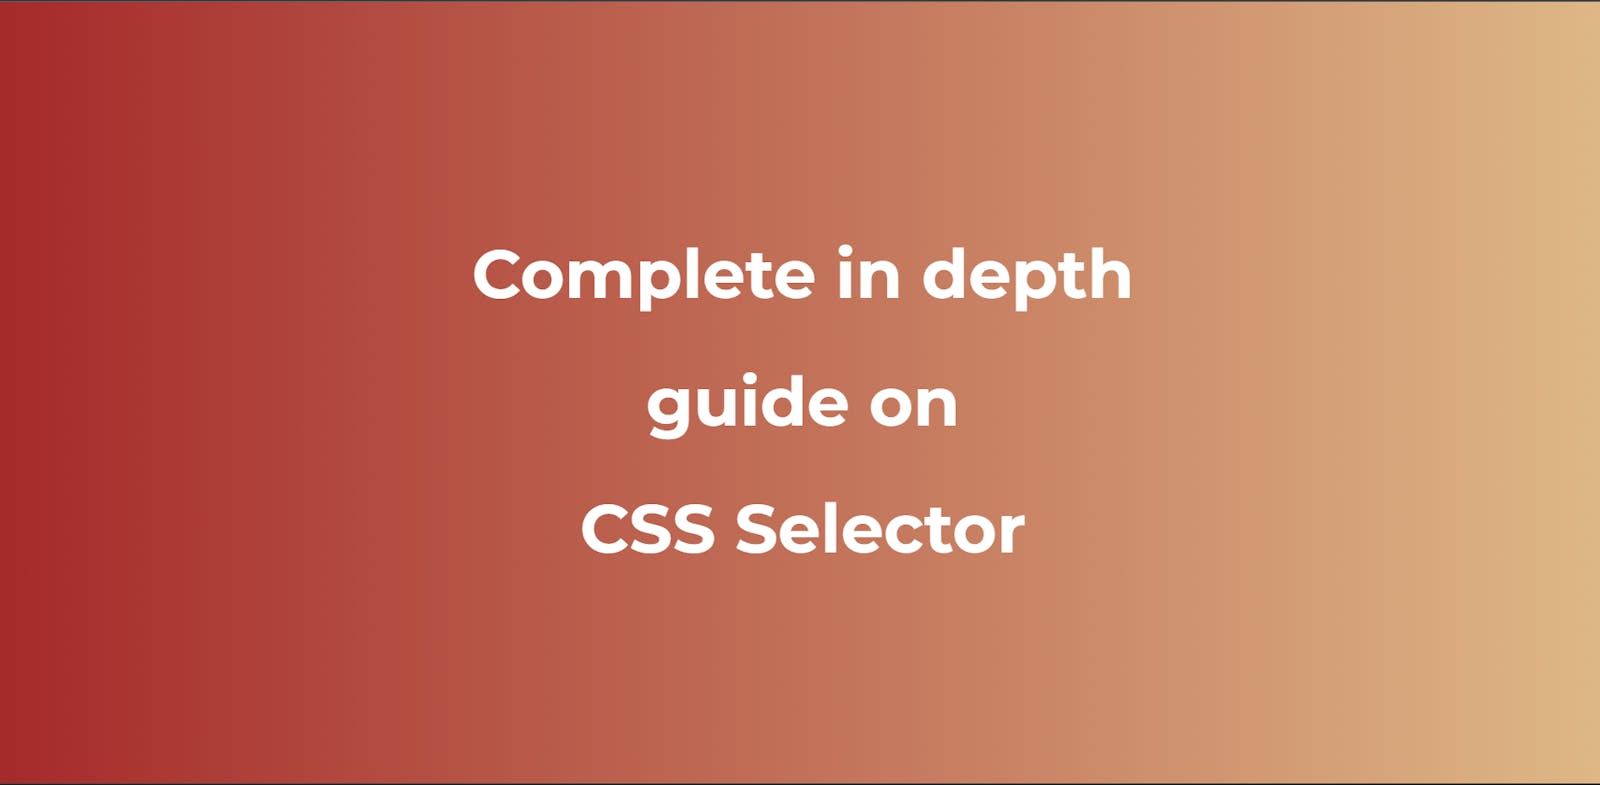 Complete in depth guide on CSS selector